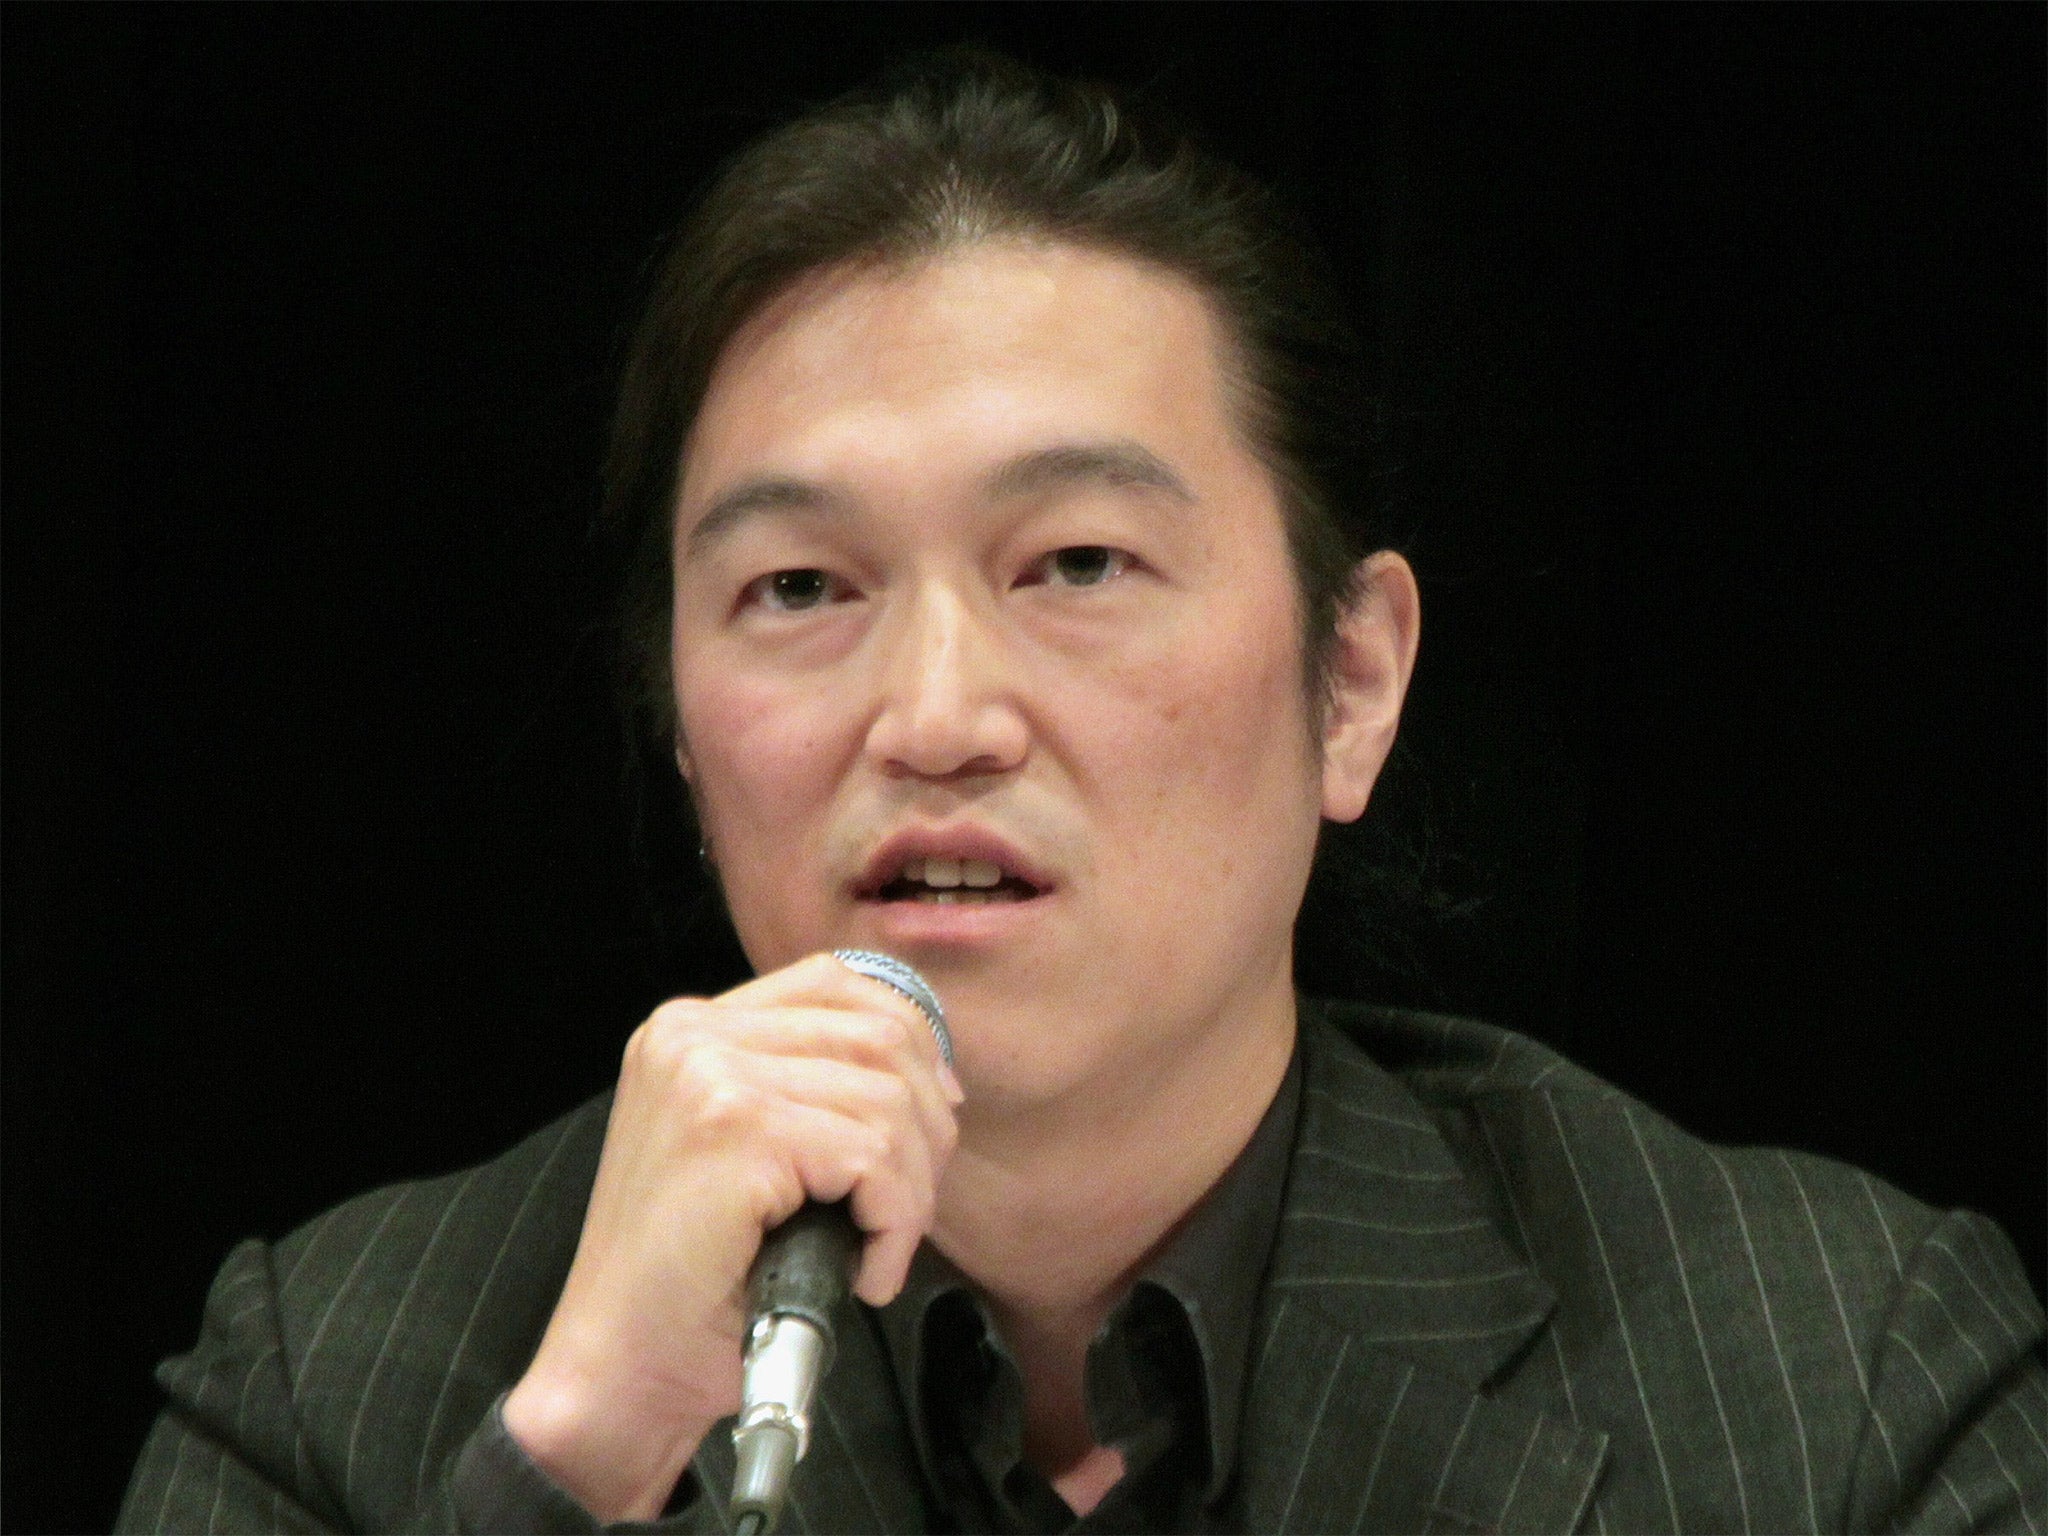 Japanese journalist Kenji Goto is being held captive by Isis